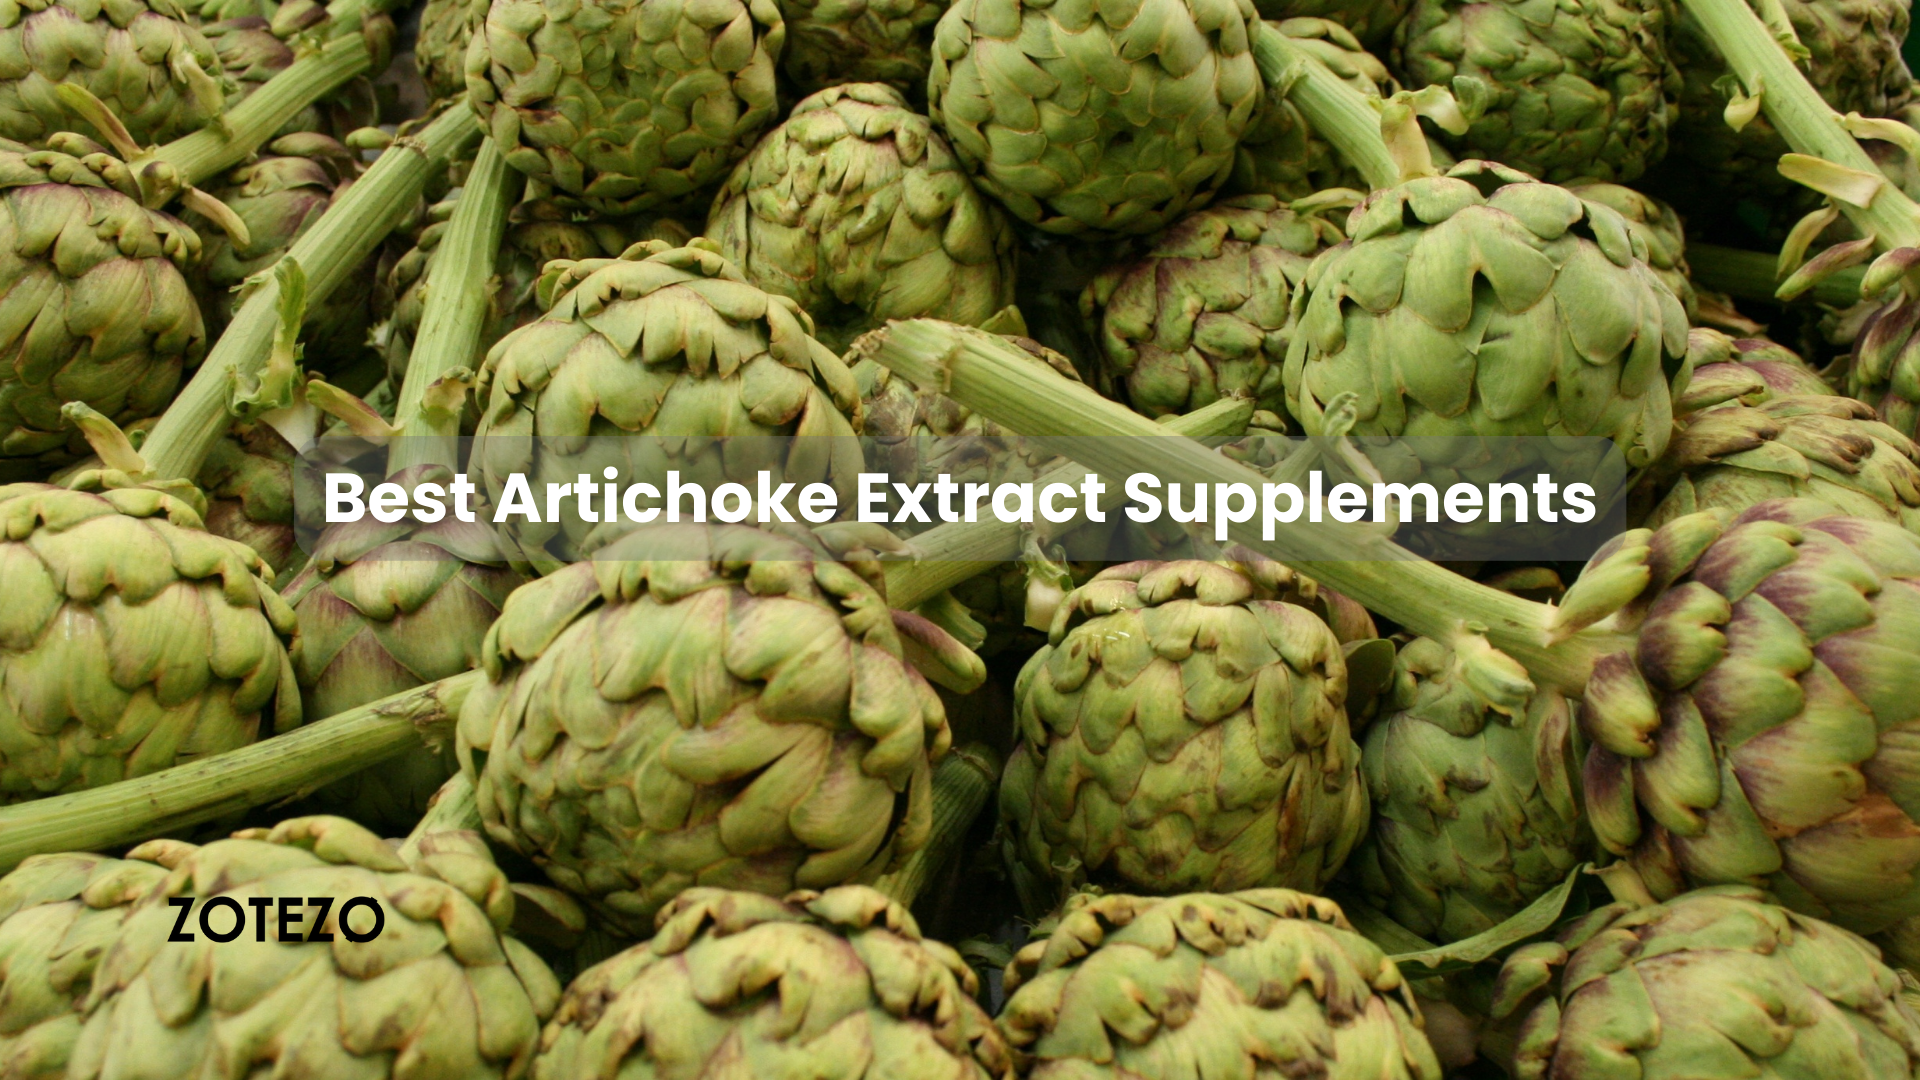 Artichoke Extract Supplements in Germany